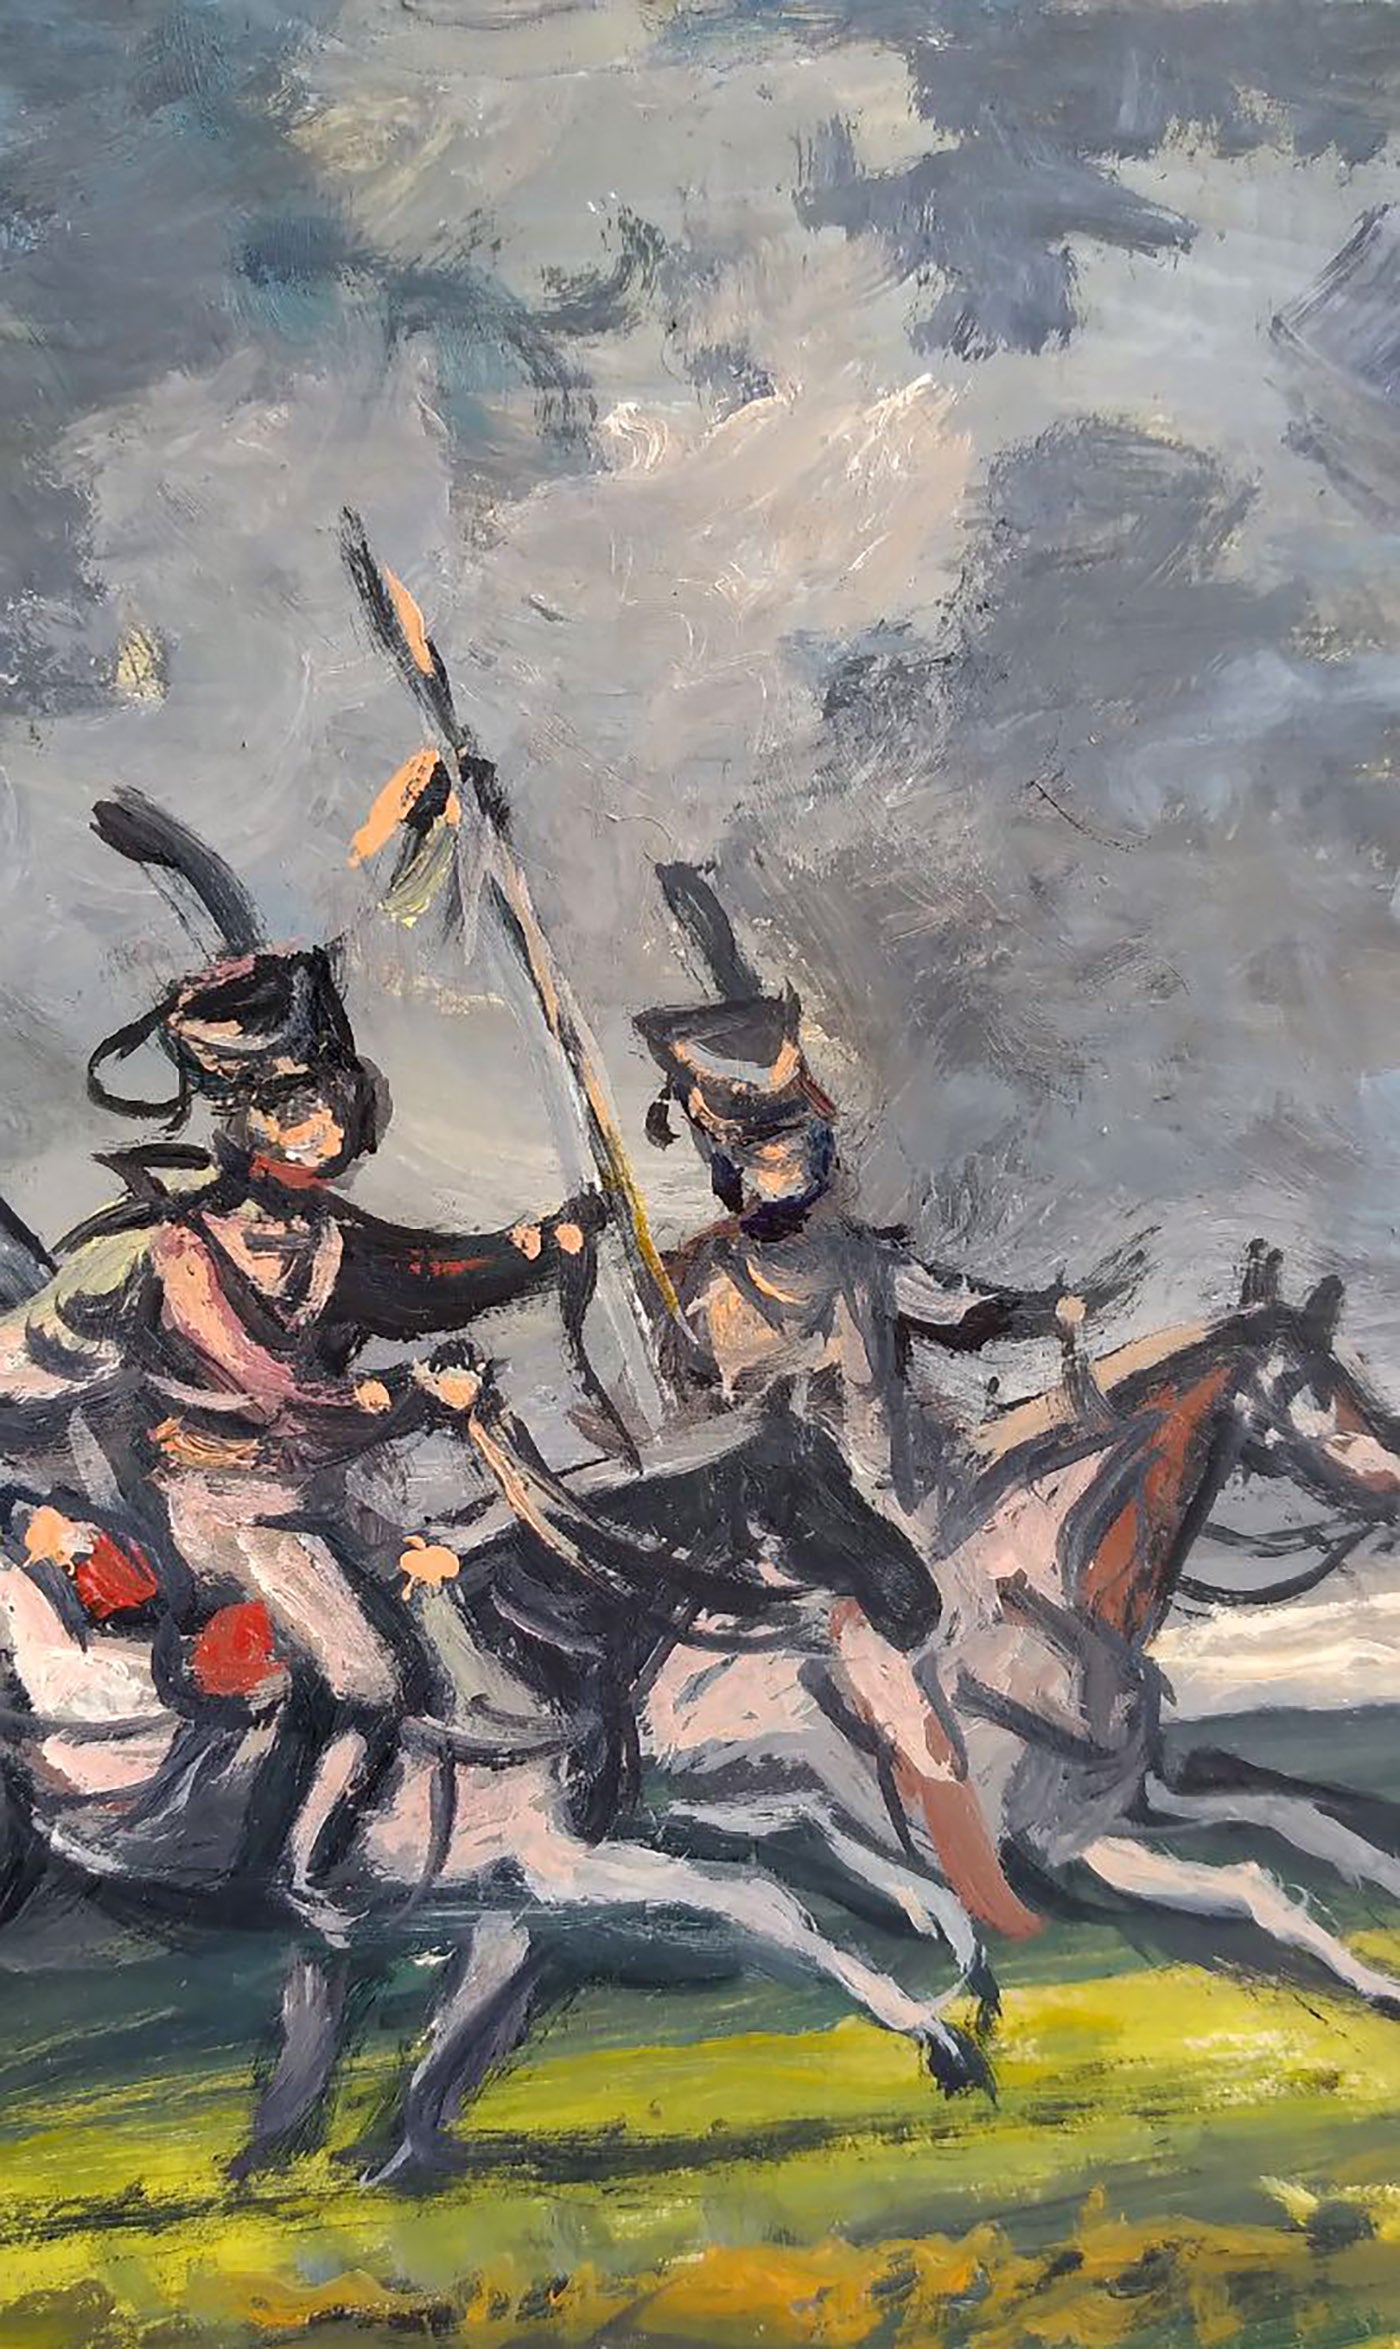 Oil painting Riders Unknown author